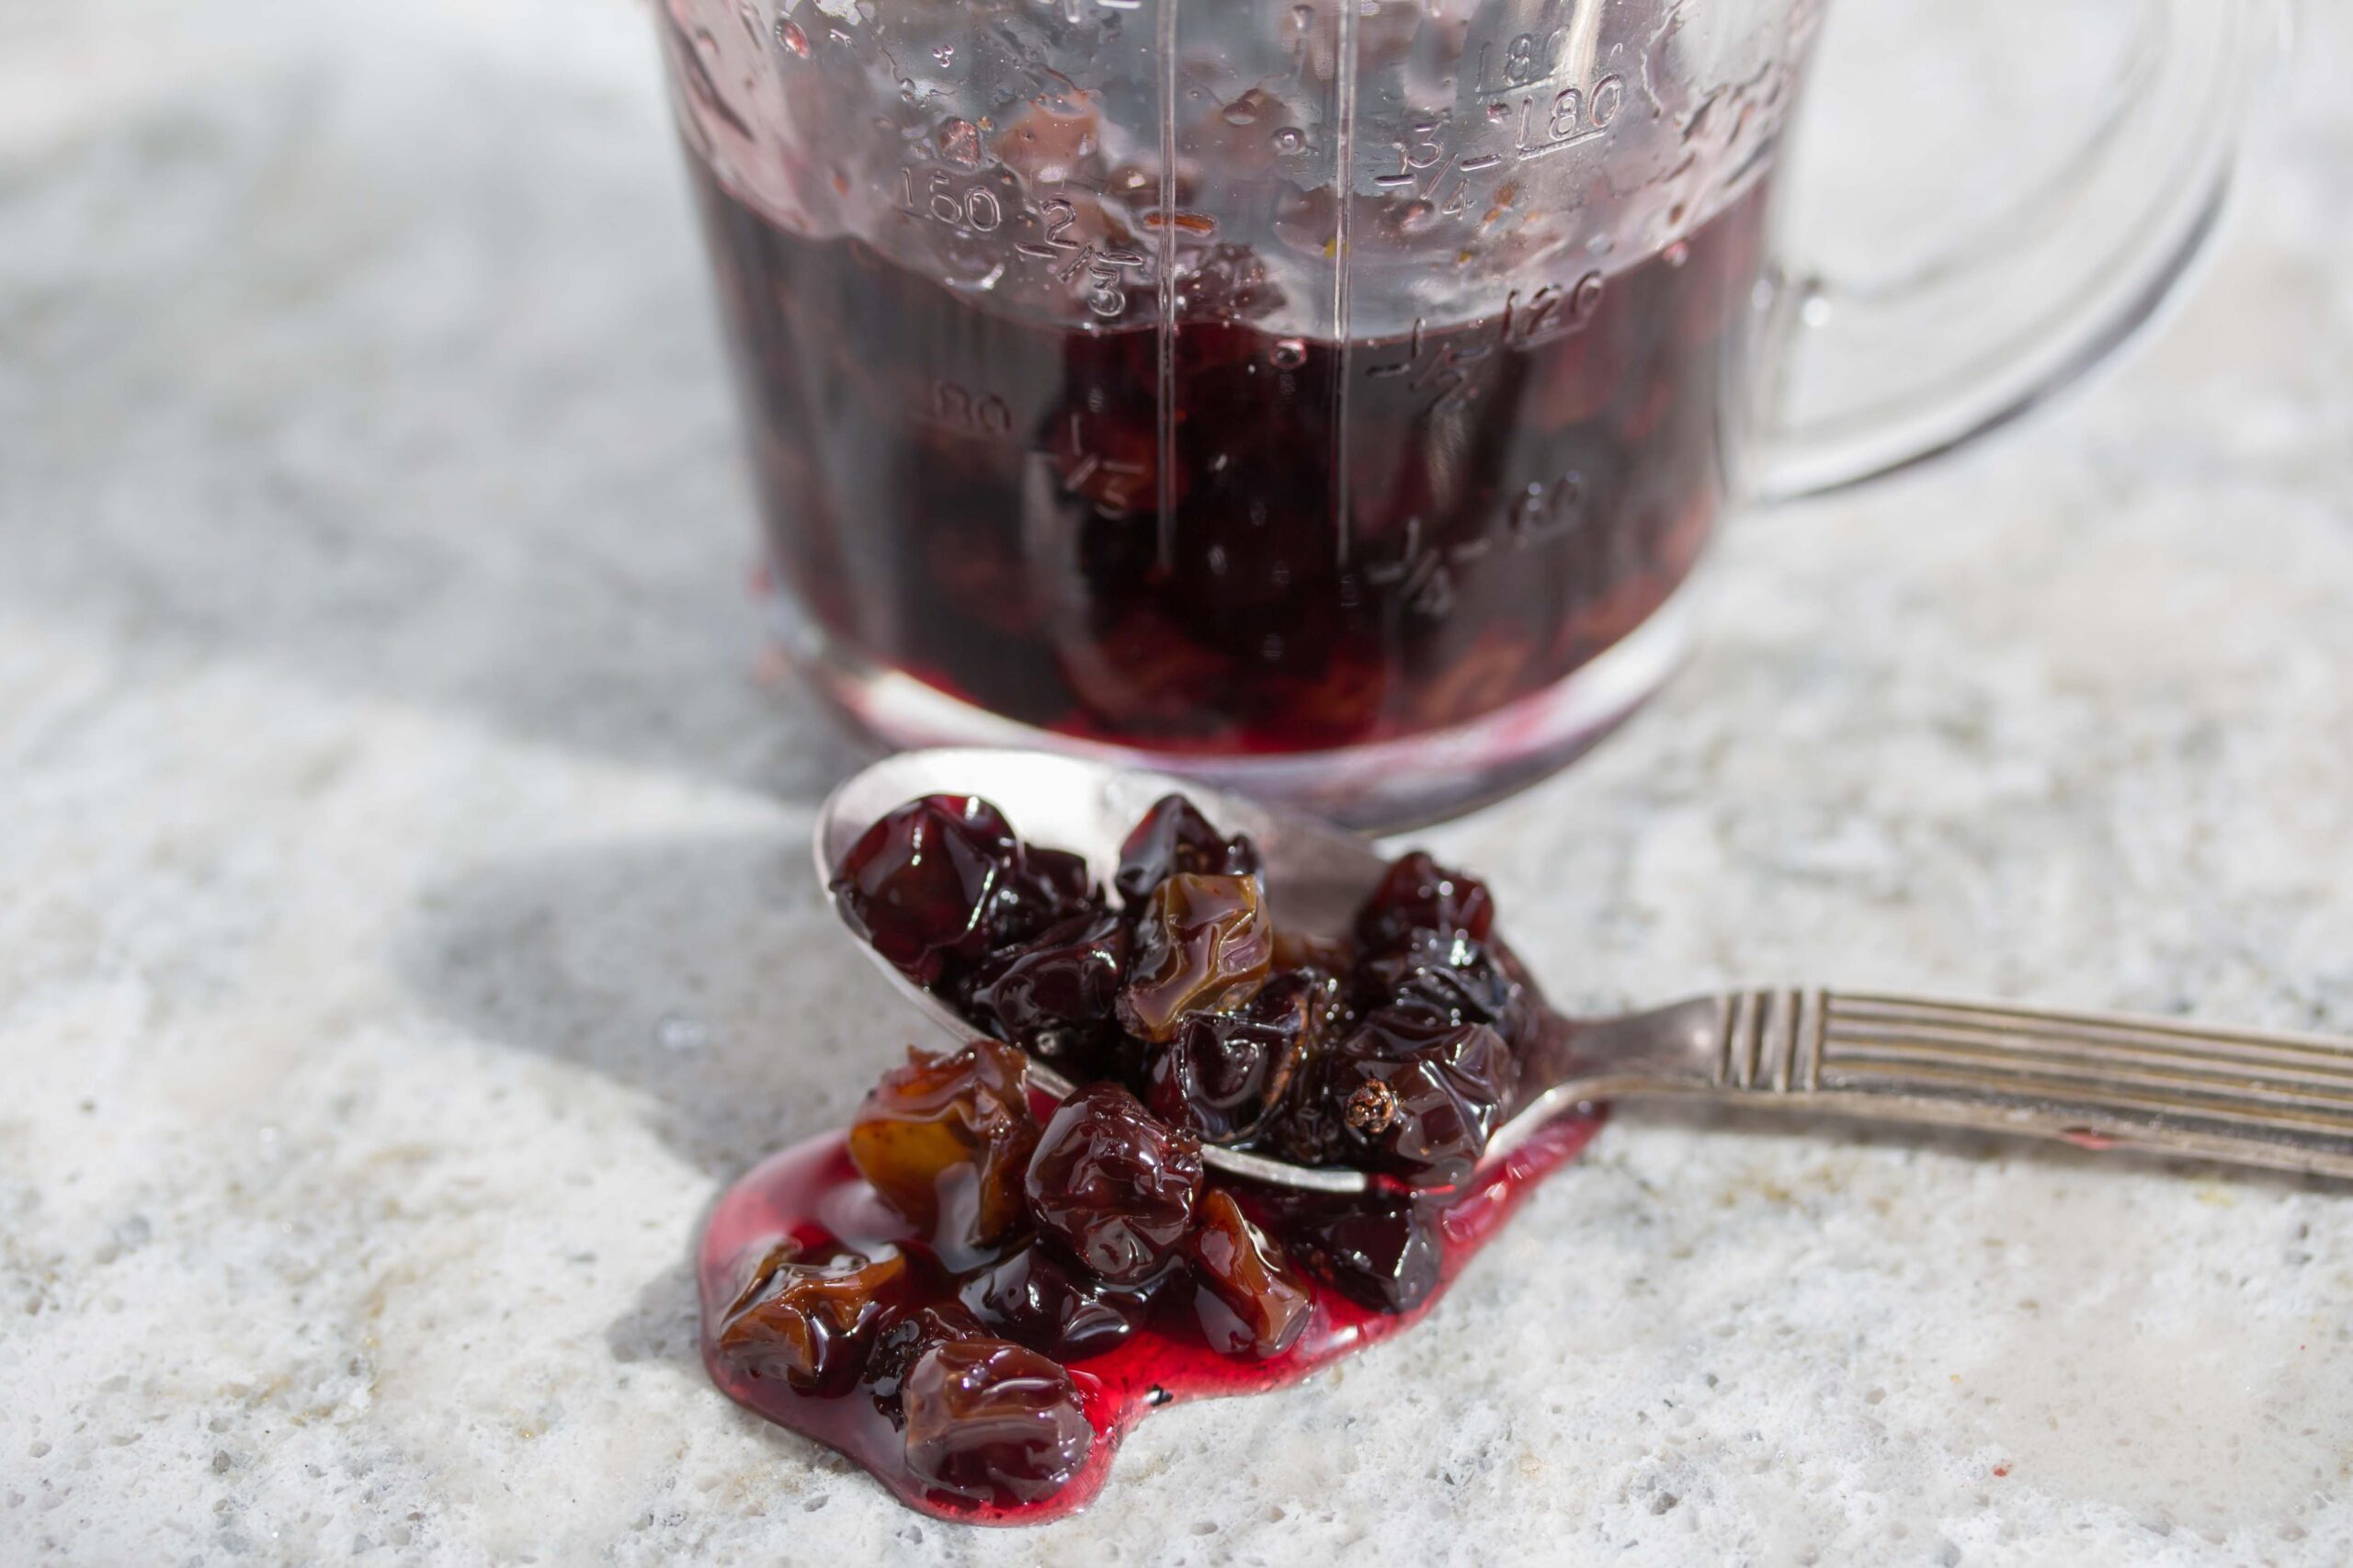  A dash of cinnamon brings a warm and cozy flavor to the raisin-wine sauce.